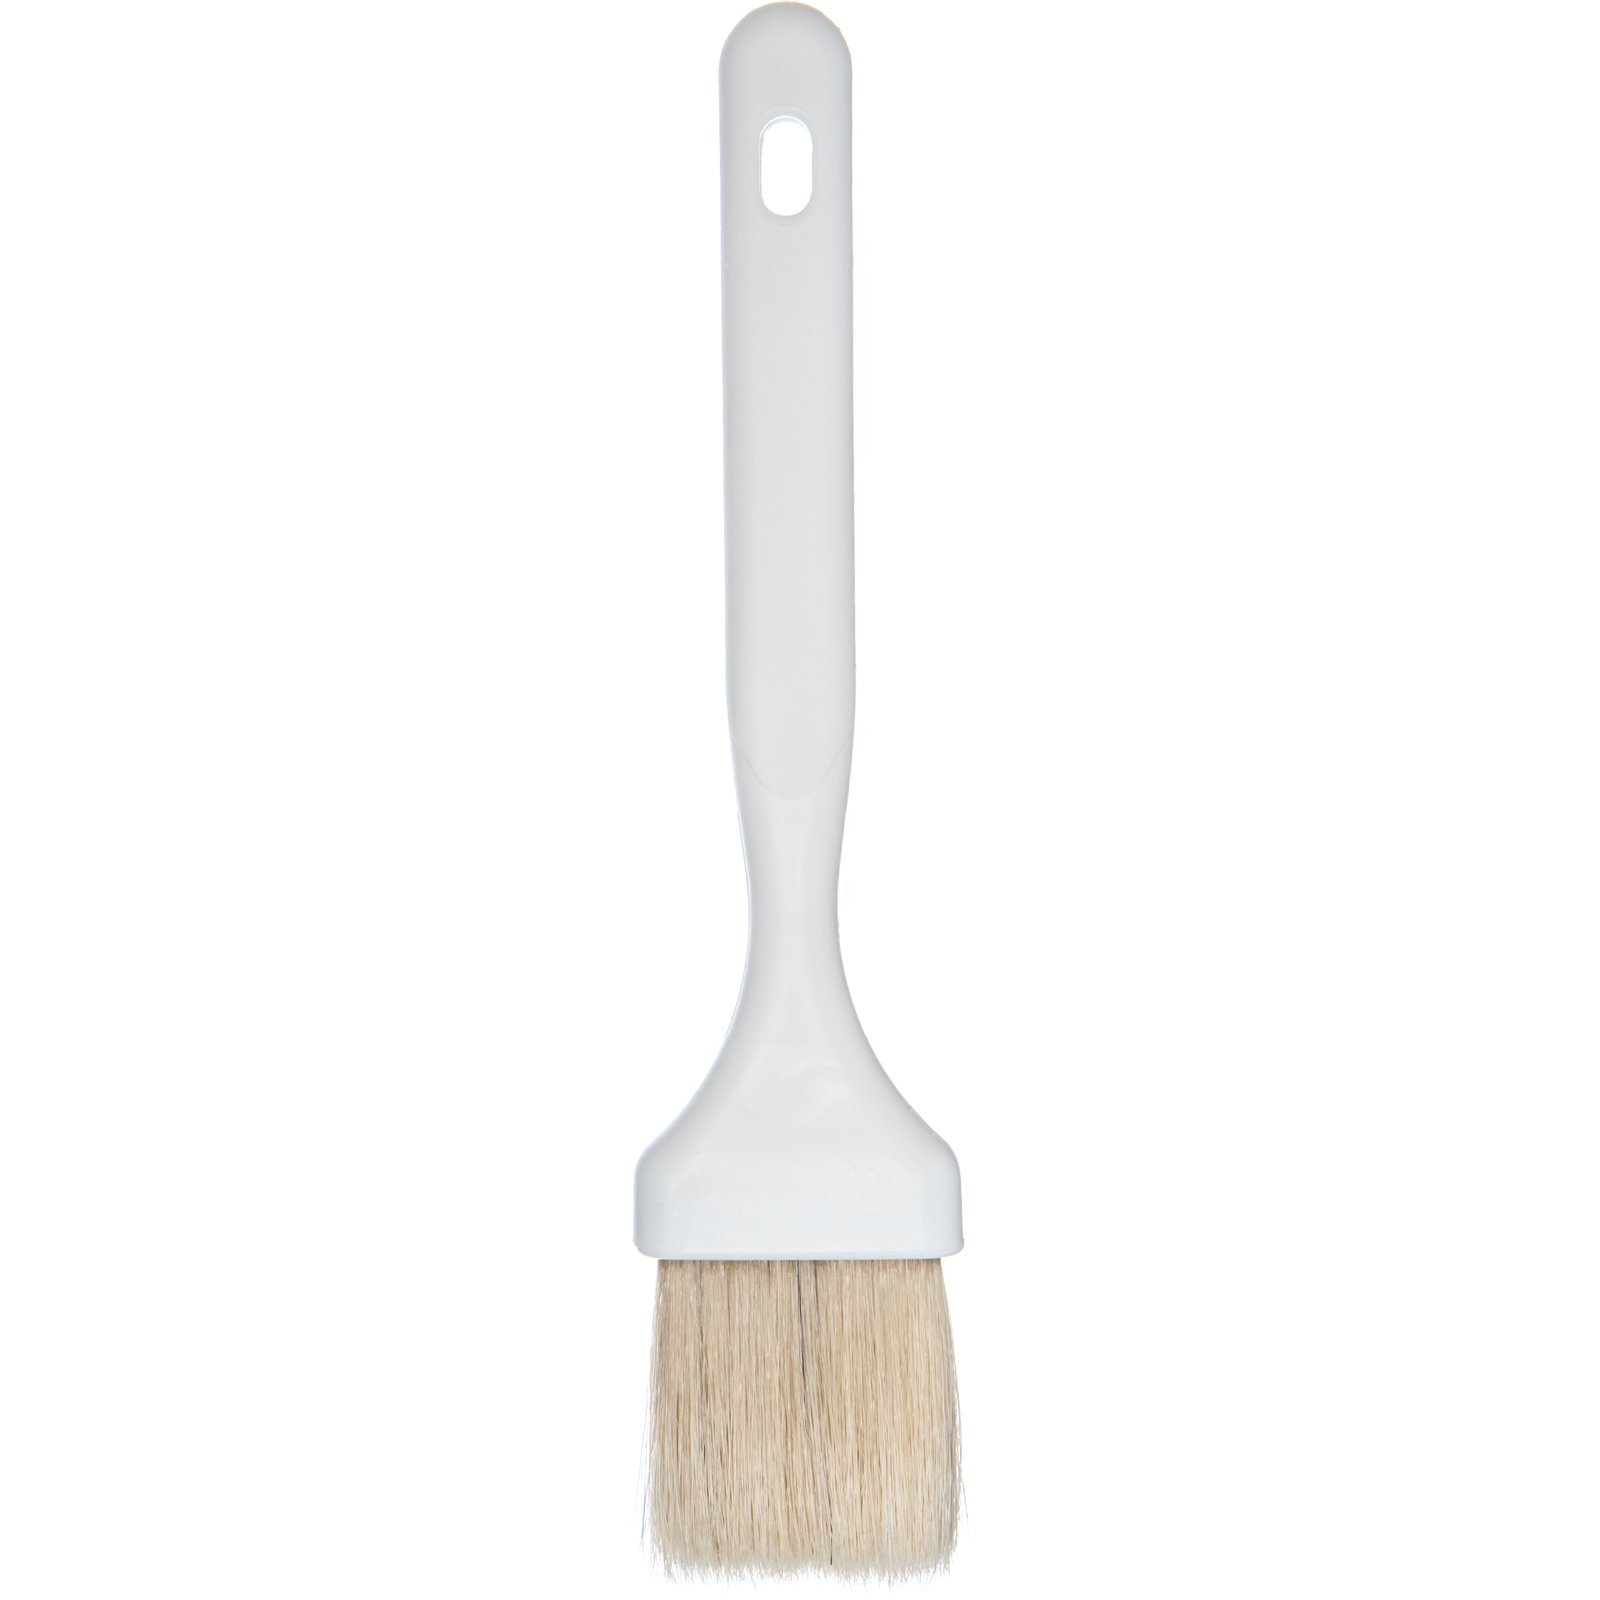 3-Piece Polyester Bristle Varnish & Sash Paint Brush Set - Danbury, CT -  New Milford, CT - Agriventures Agway Pickup & Delivery